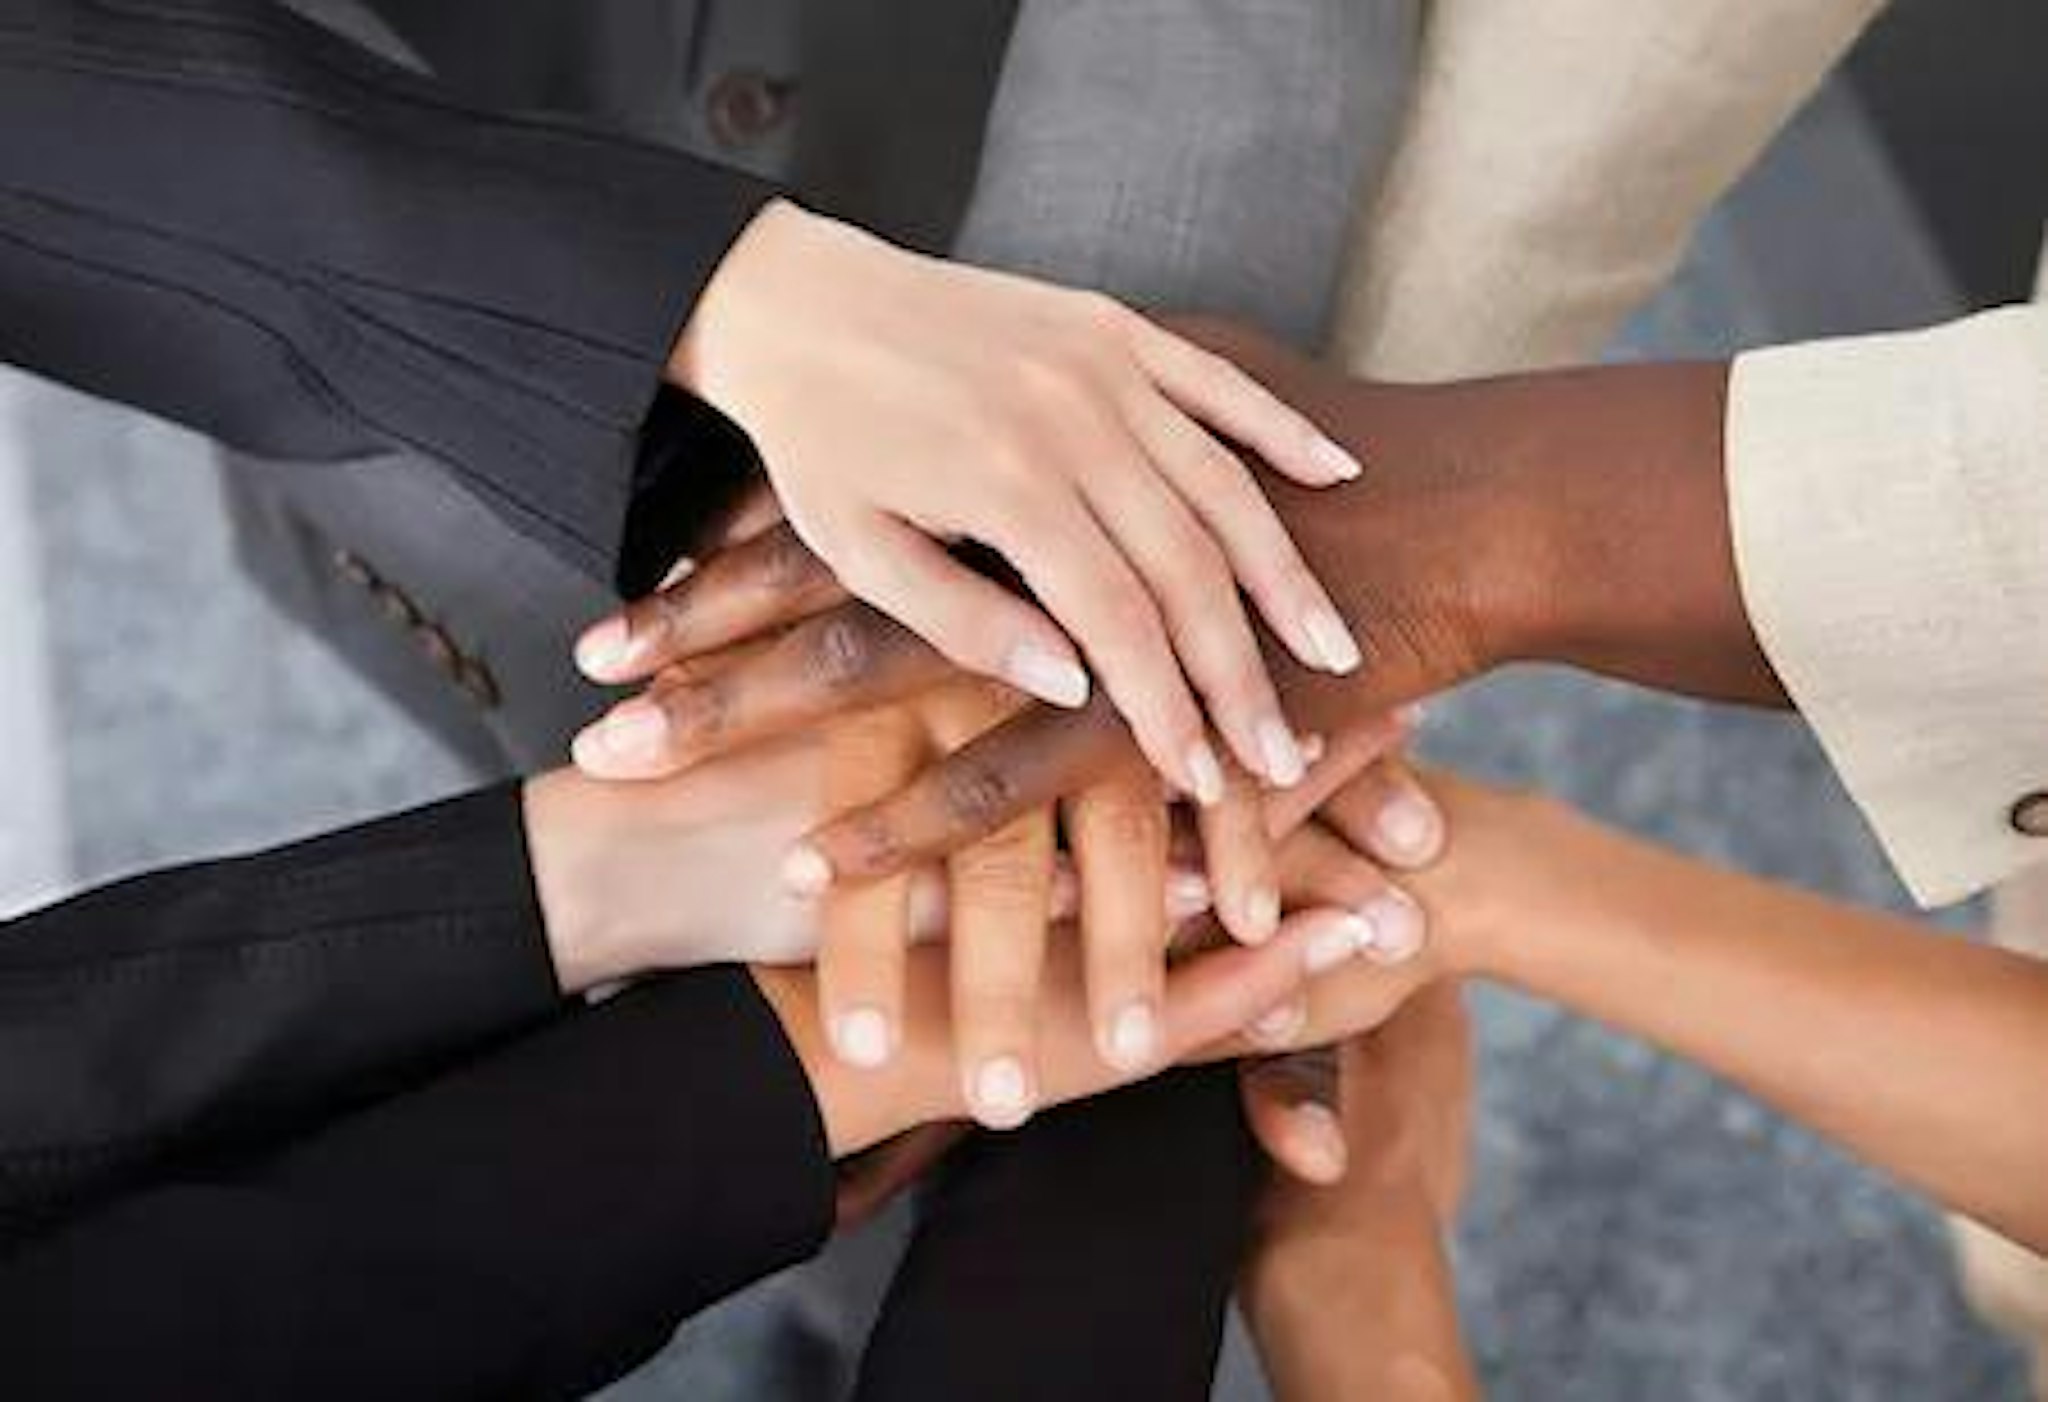 Numerous hands come together in center of image to represent diversity and teamwork, two aspects of creating a healthy board culture.